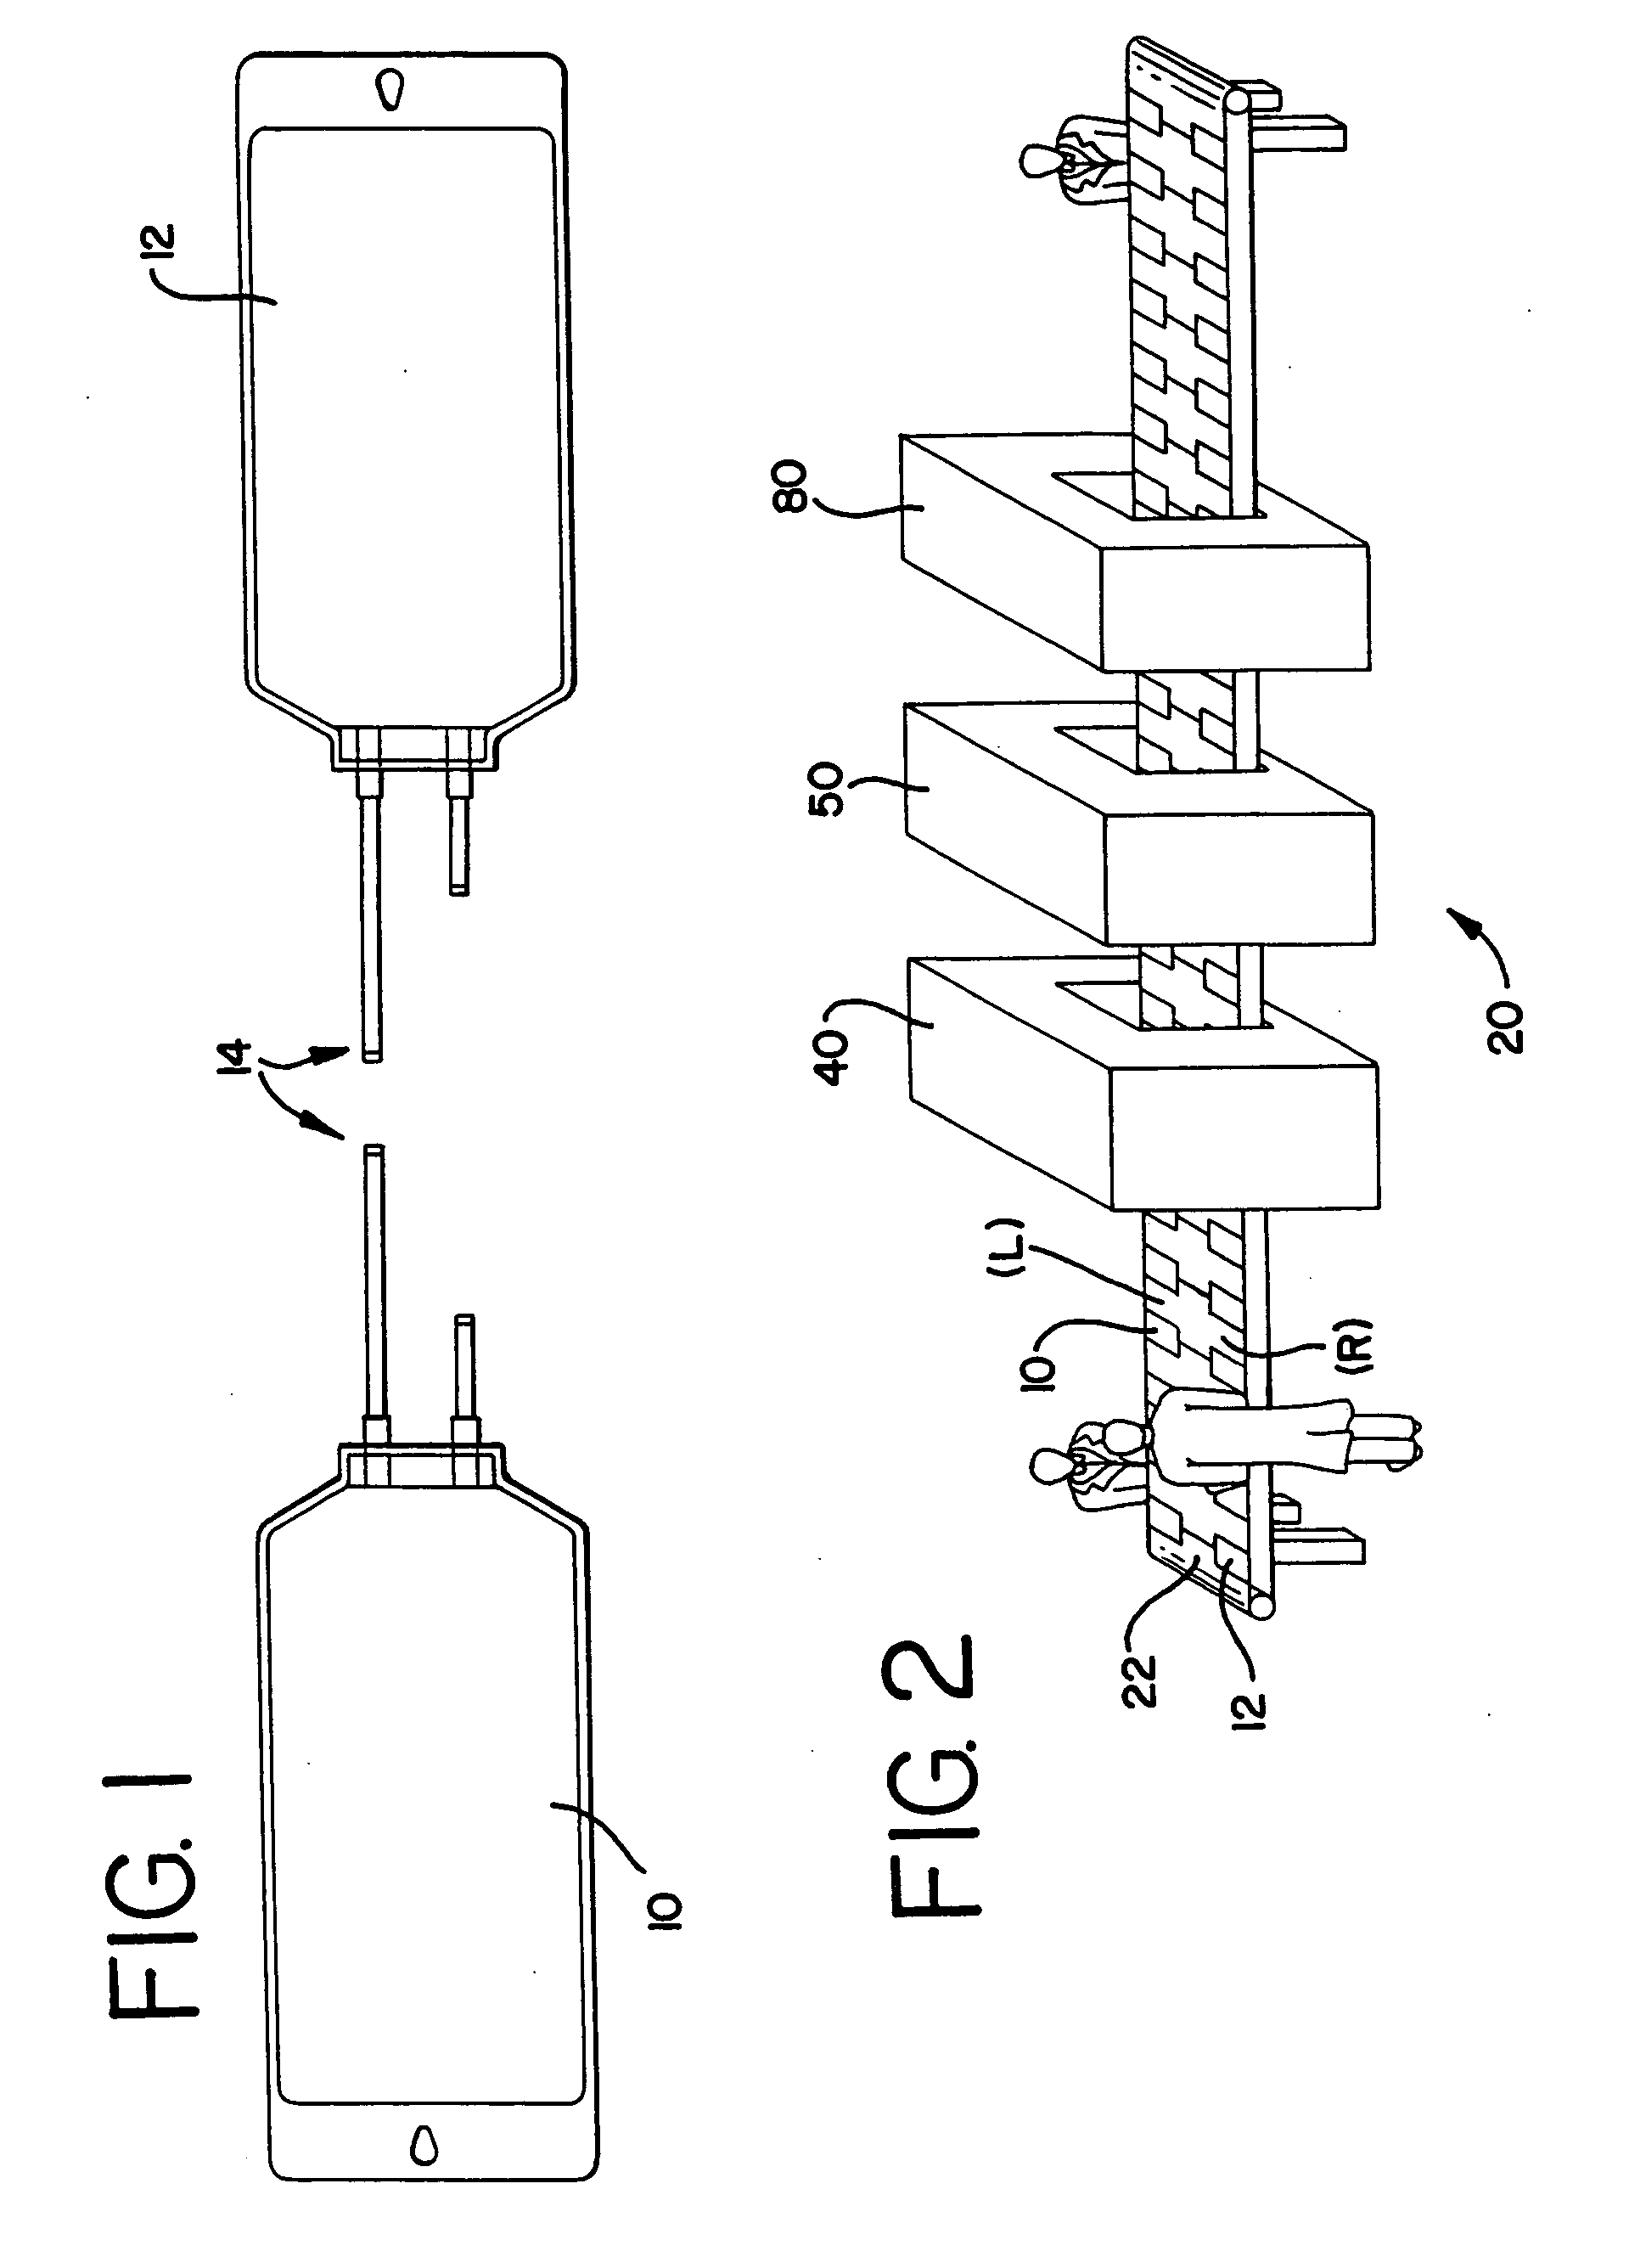 Method and apparatus for manipulating pre-sterilized components in an active sterile field